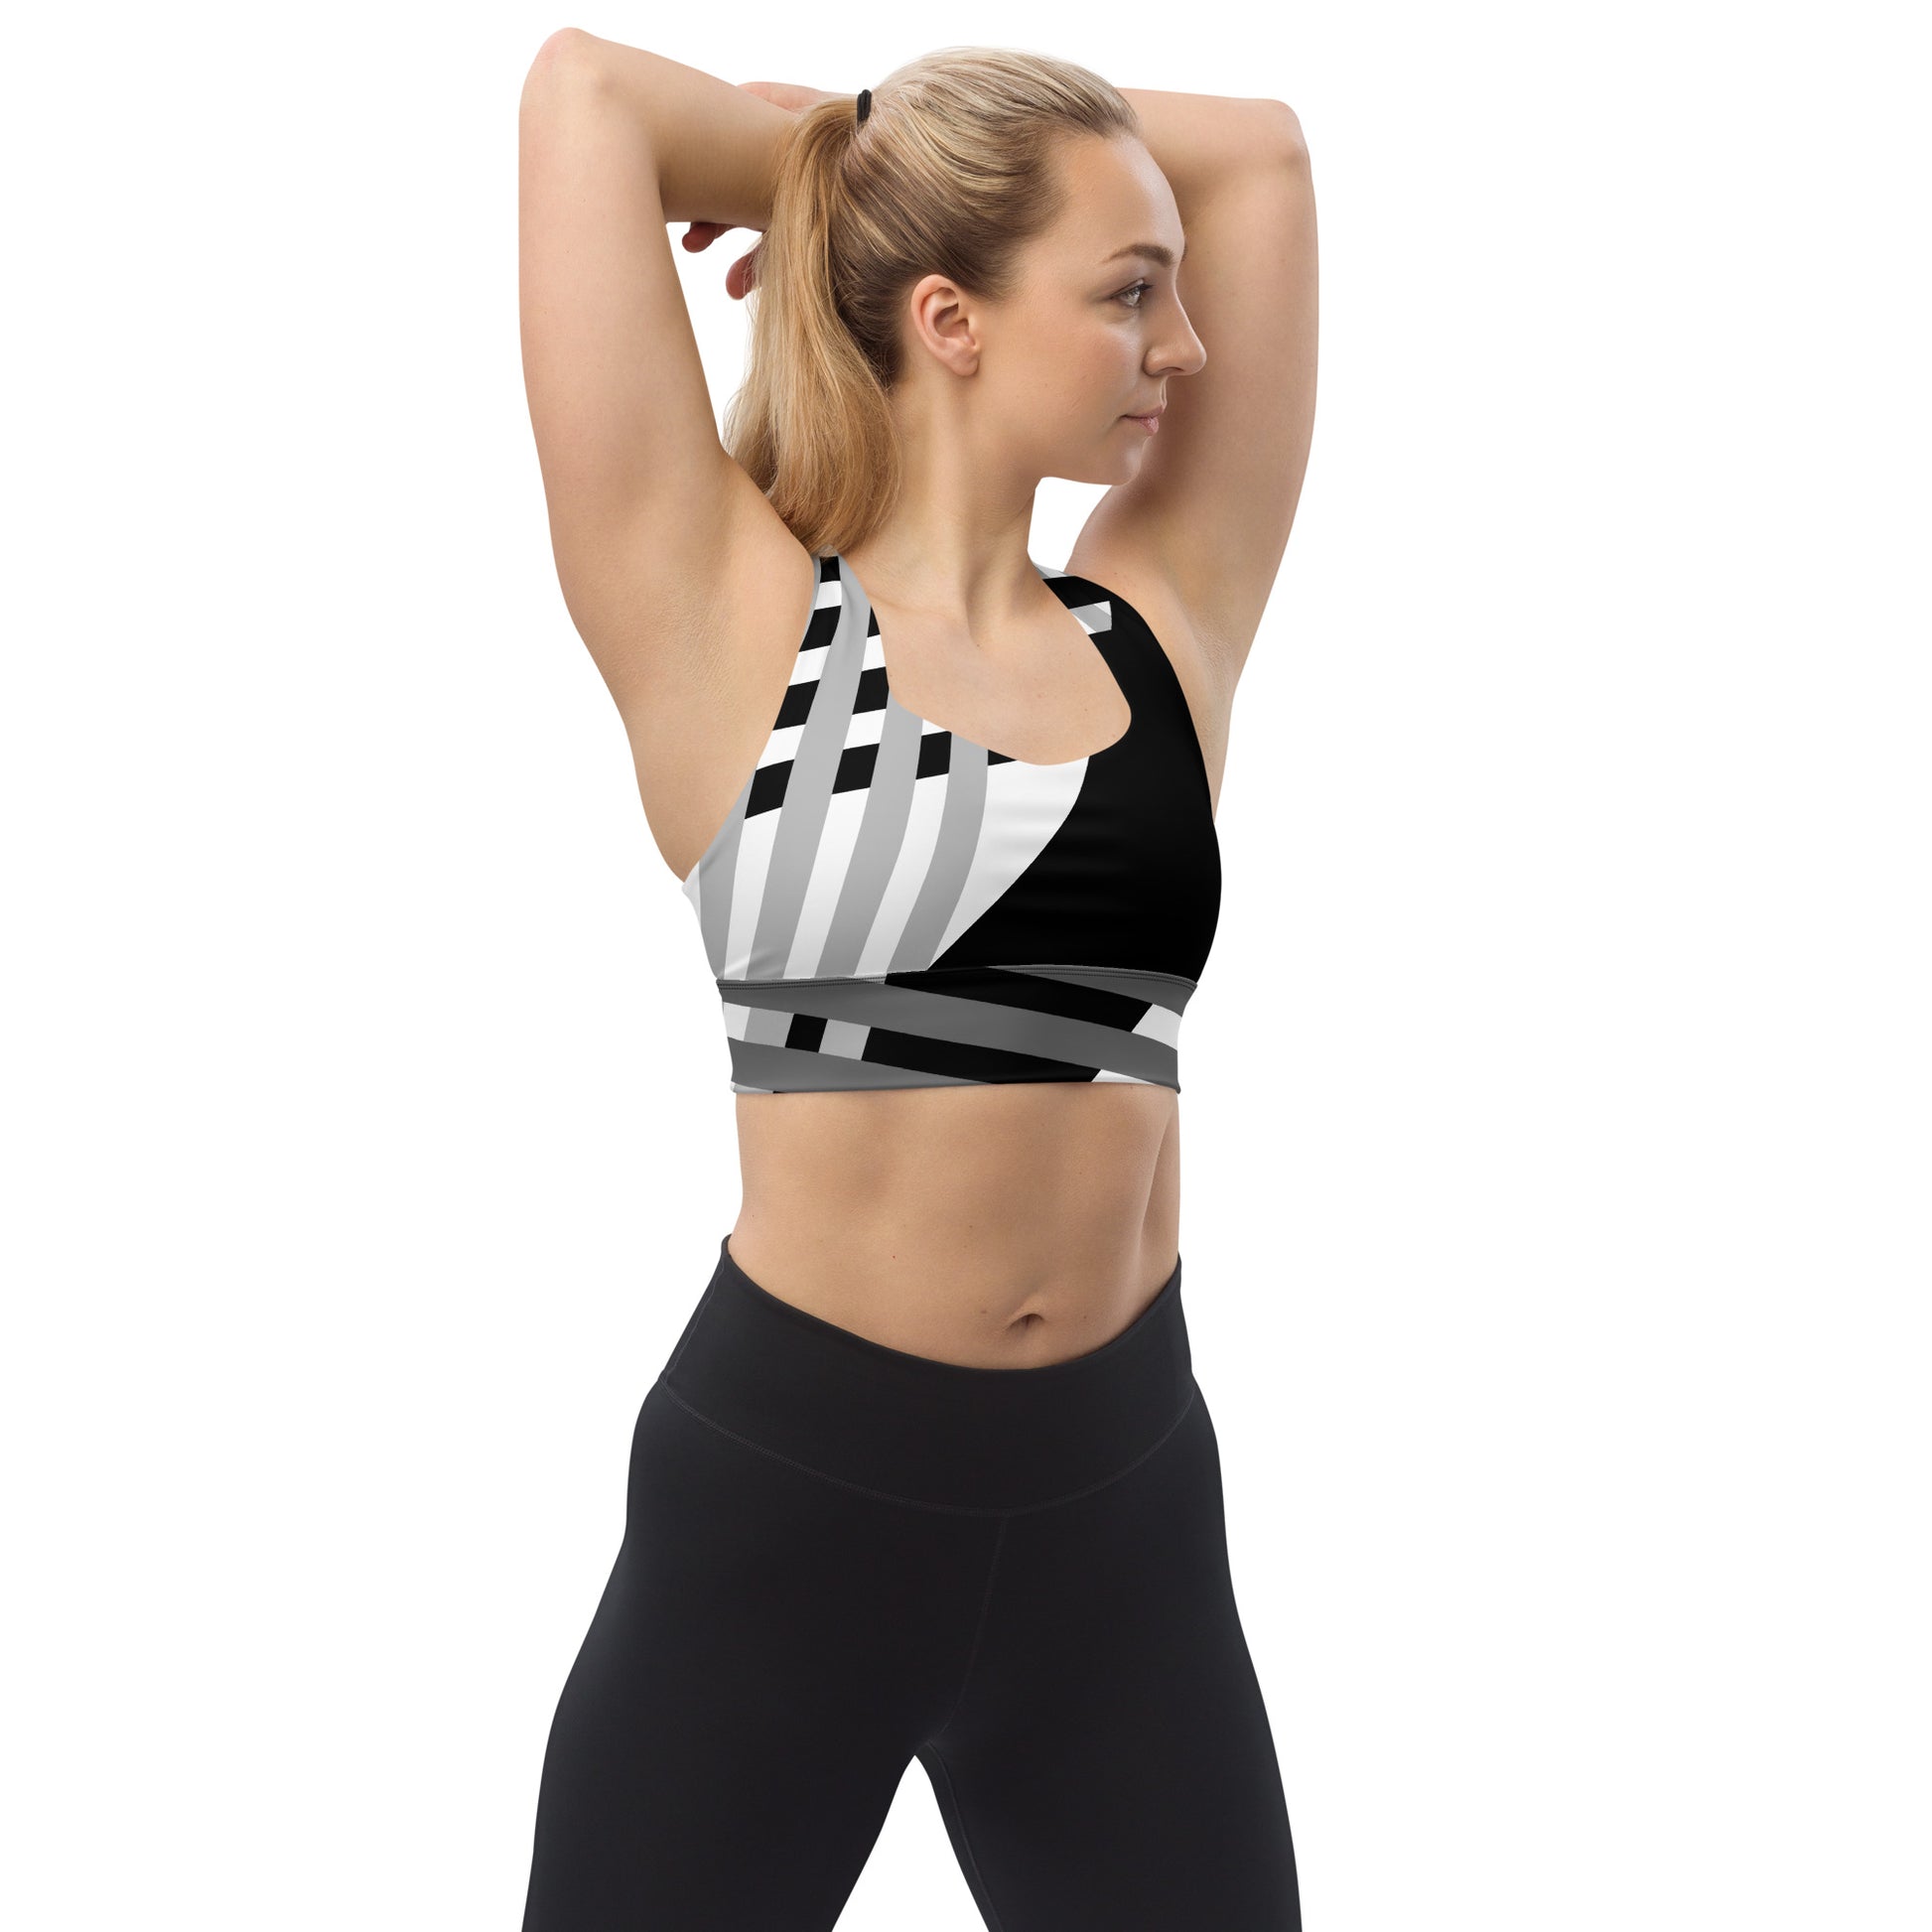 Great Fitting Maximum Support Sports Bras